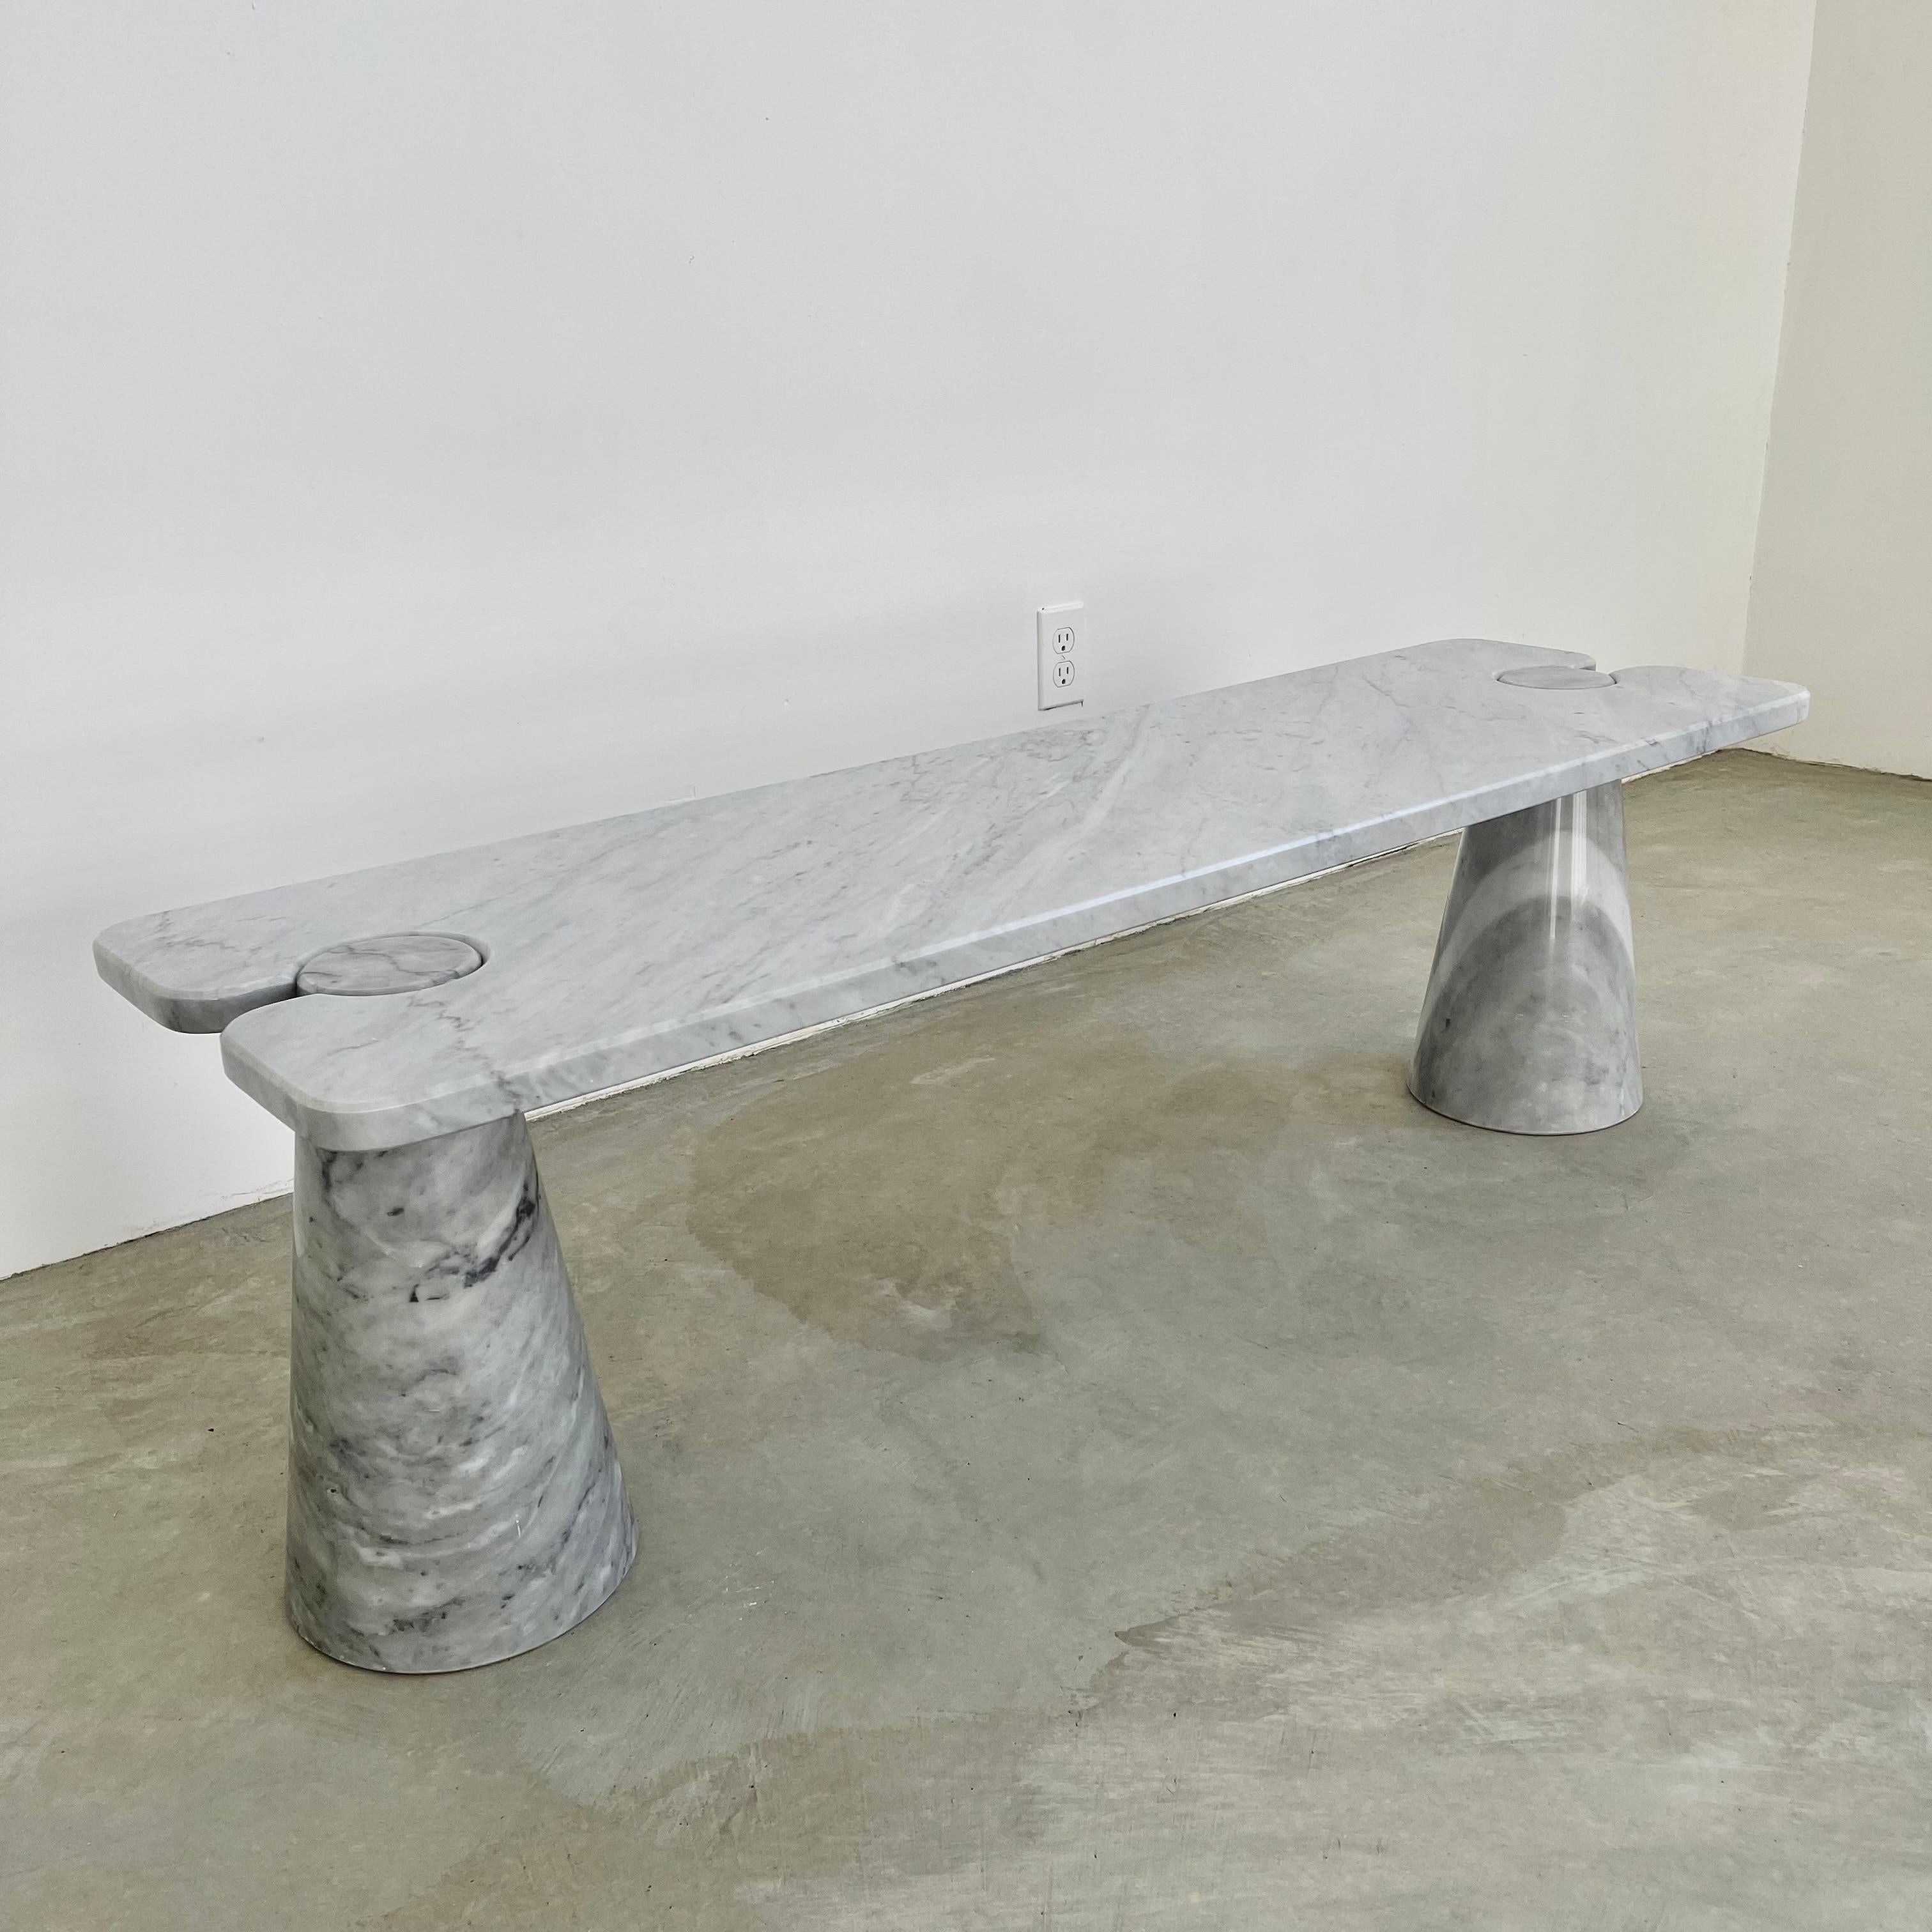 Stunning Carrara marble coffee table attributed to Angelo Mangiarotti. Large cone shaped bases hold a large slab of marble with circular cut outs. Extremely heavy and well made. Strong enough to be used as a bench if desired. White and blue/grey